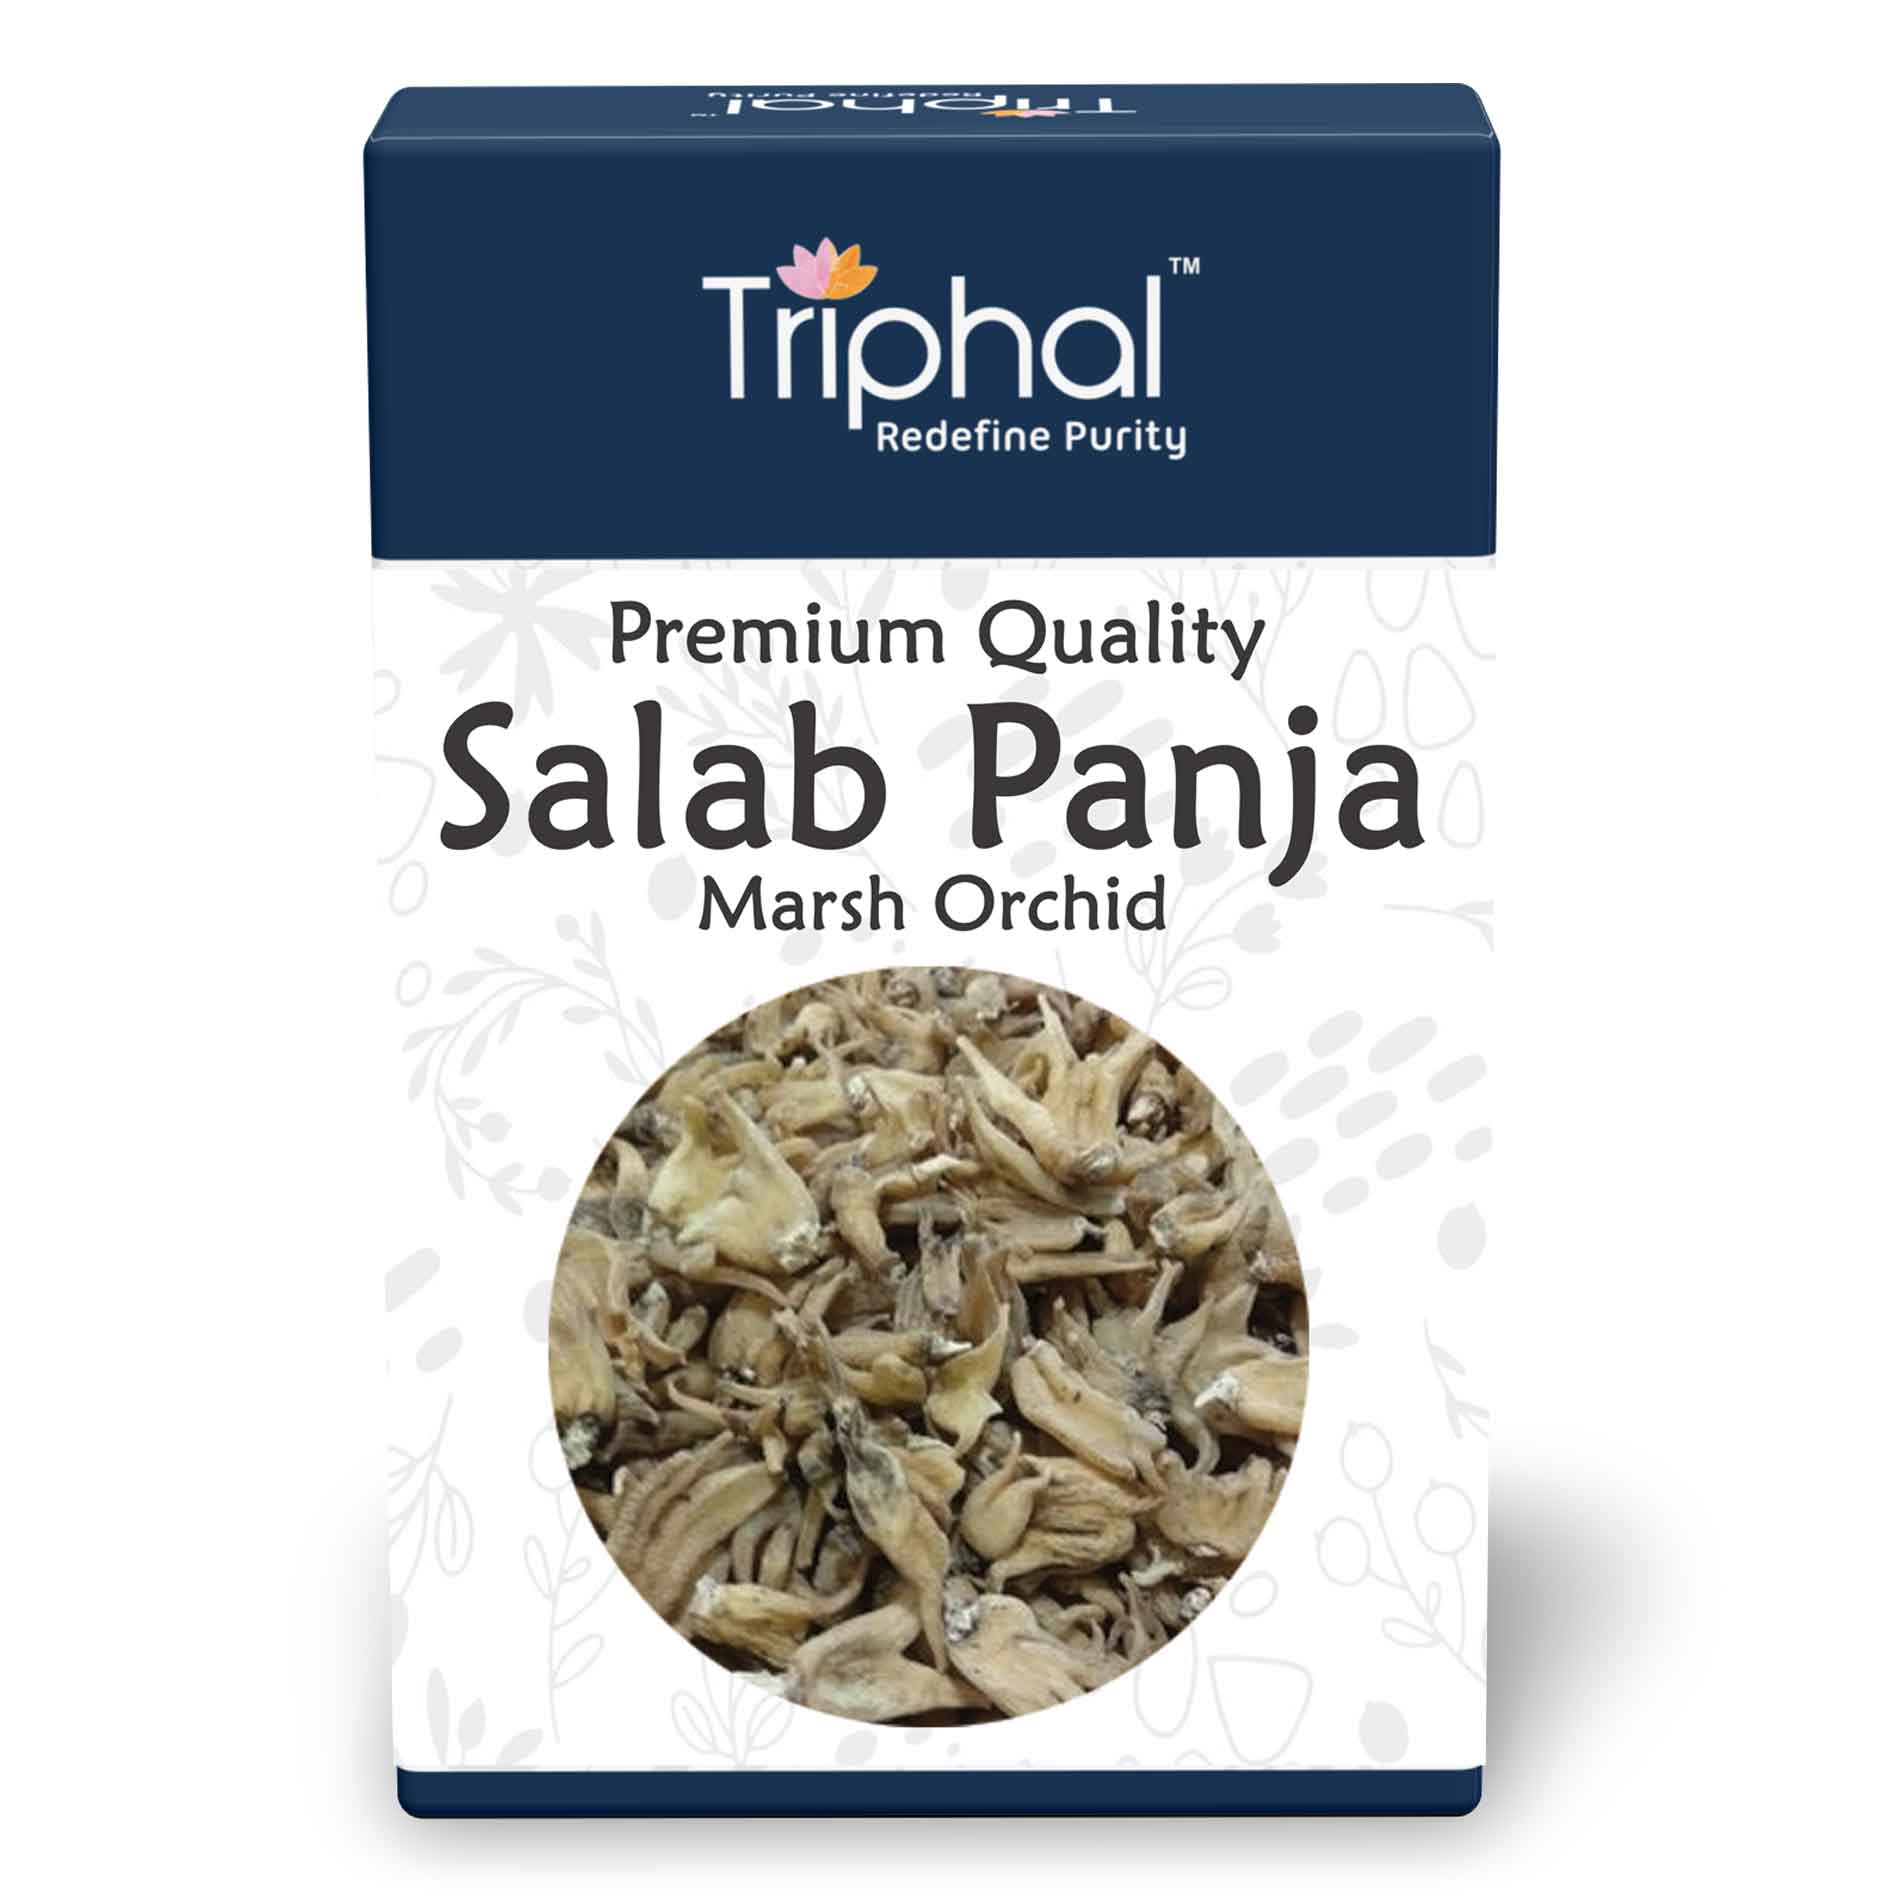 Salam Panja Root Powder - Ayurvedic Herb for Male Infertility, Testosterone Boost, and Immunity - Anti-Inflammatory, Antioxidant, and Antimicrobial Properties - Himalayan Herb